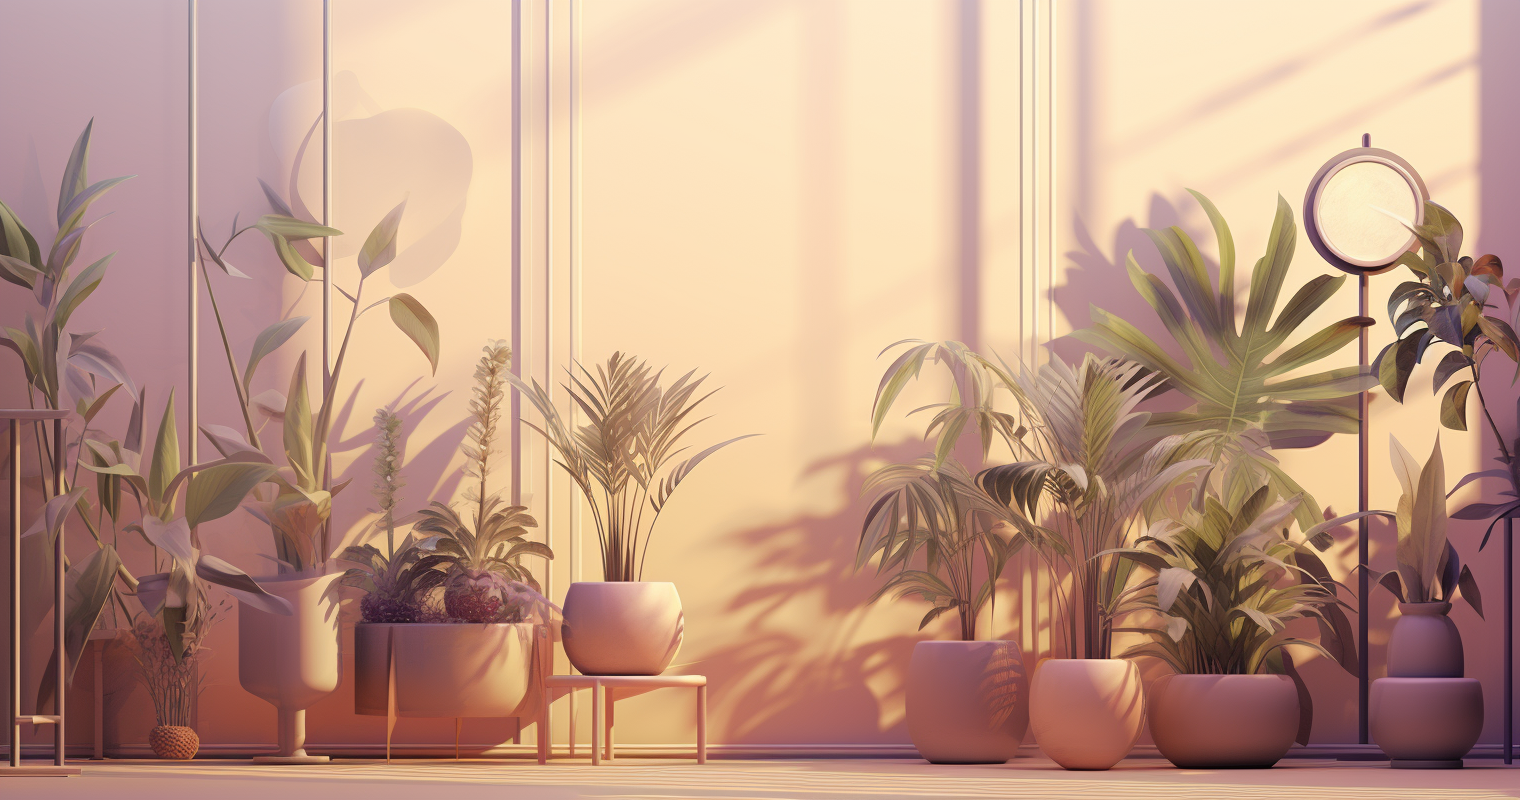 Houseplants Acclimating to a New Environment